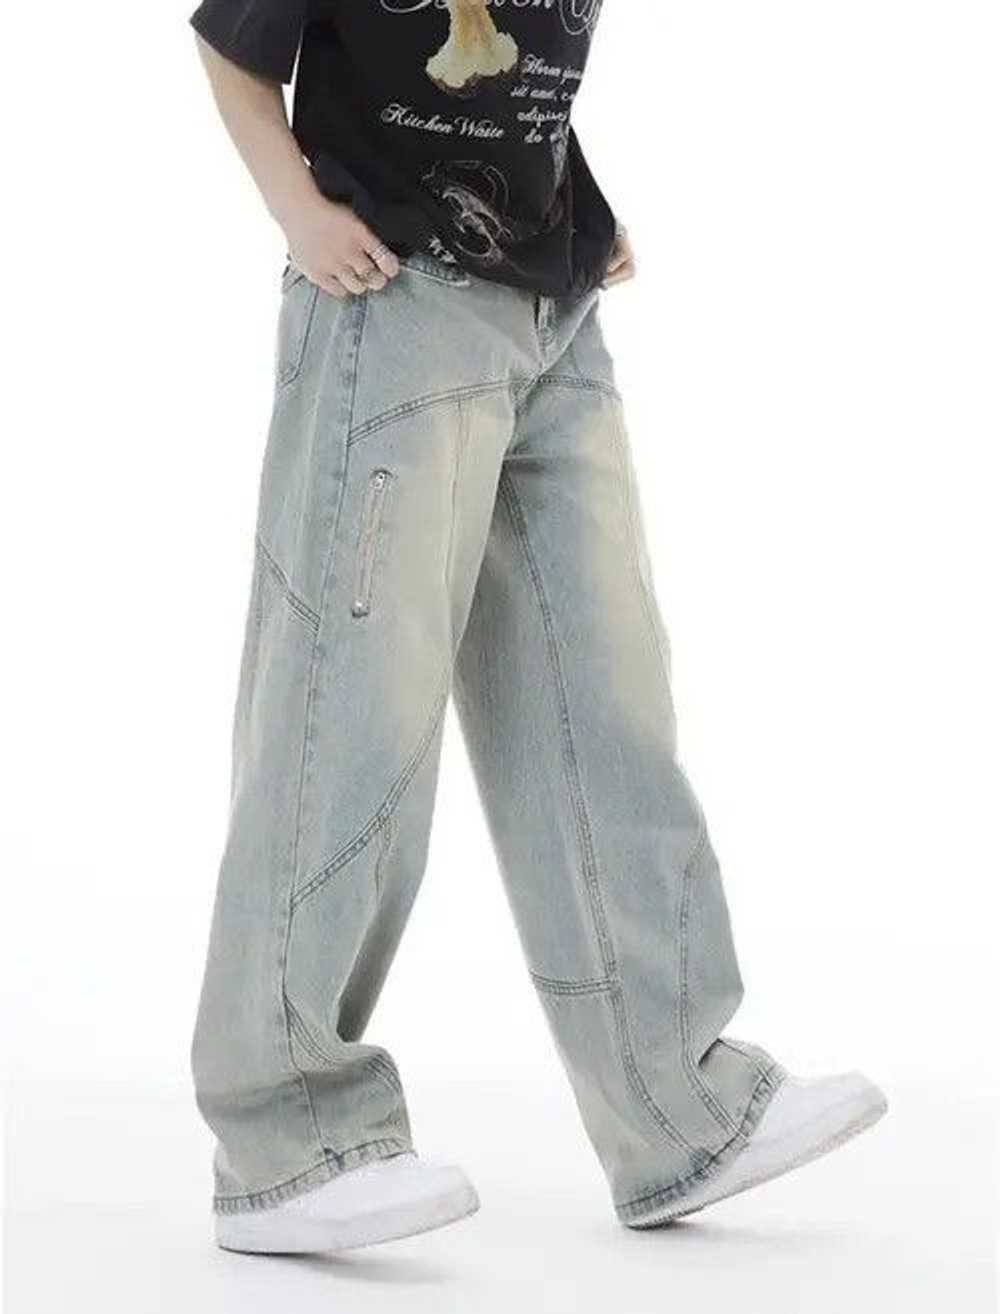 Jean × Streetwear Topstitched Seam Baggy Jeans Men - image 3